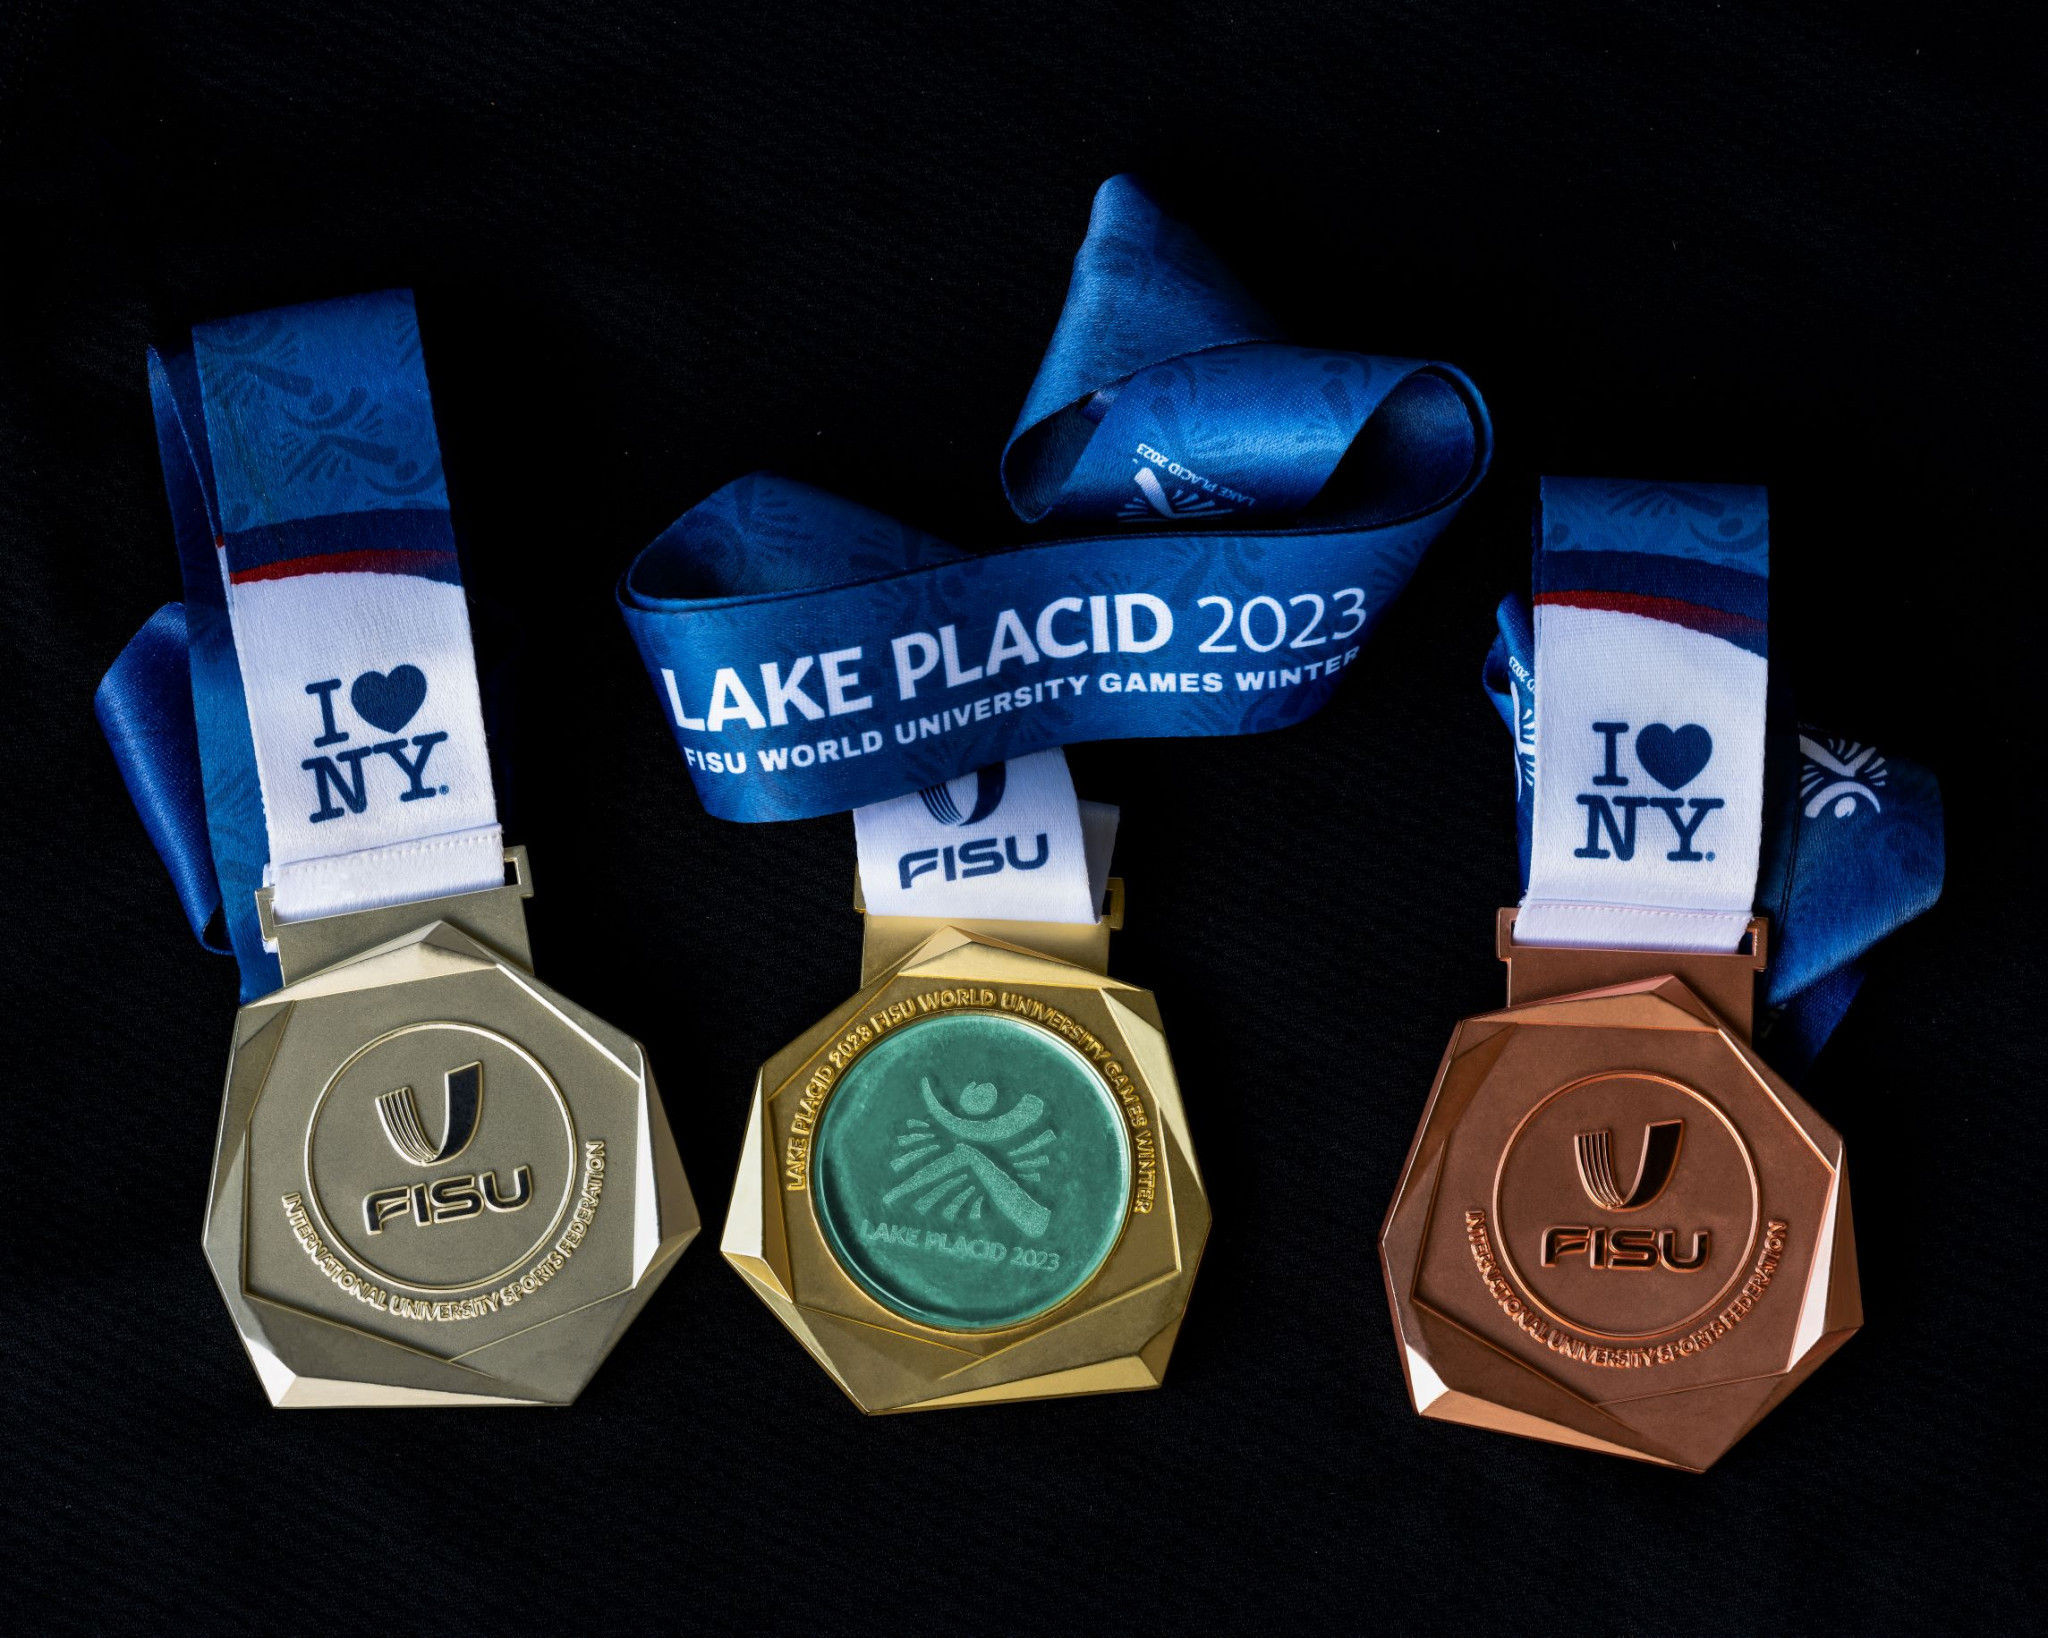 Lake Placid 2023 hails Alfred University role in making sustainable "one-of-a-kind" medals